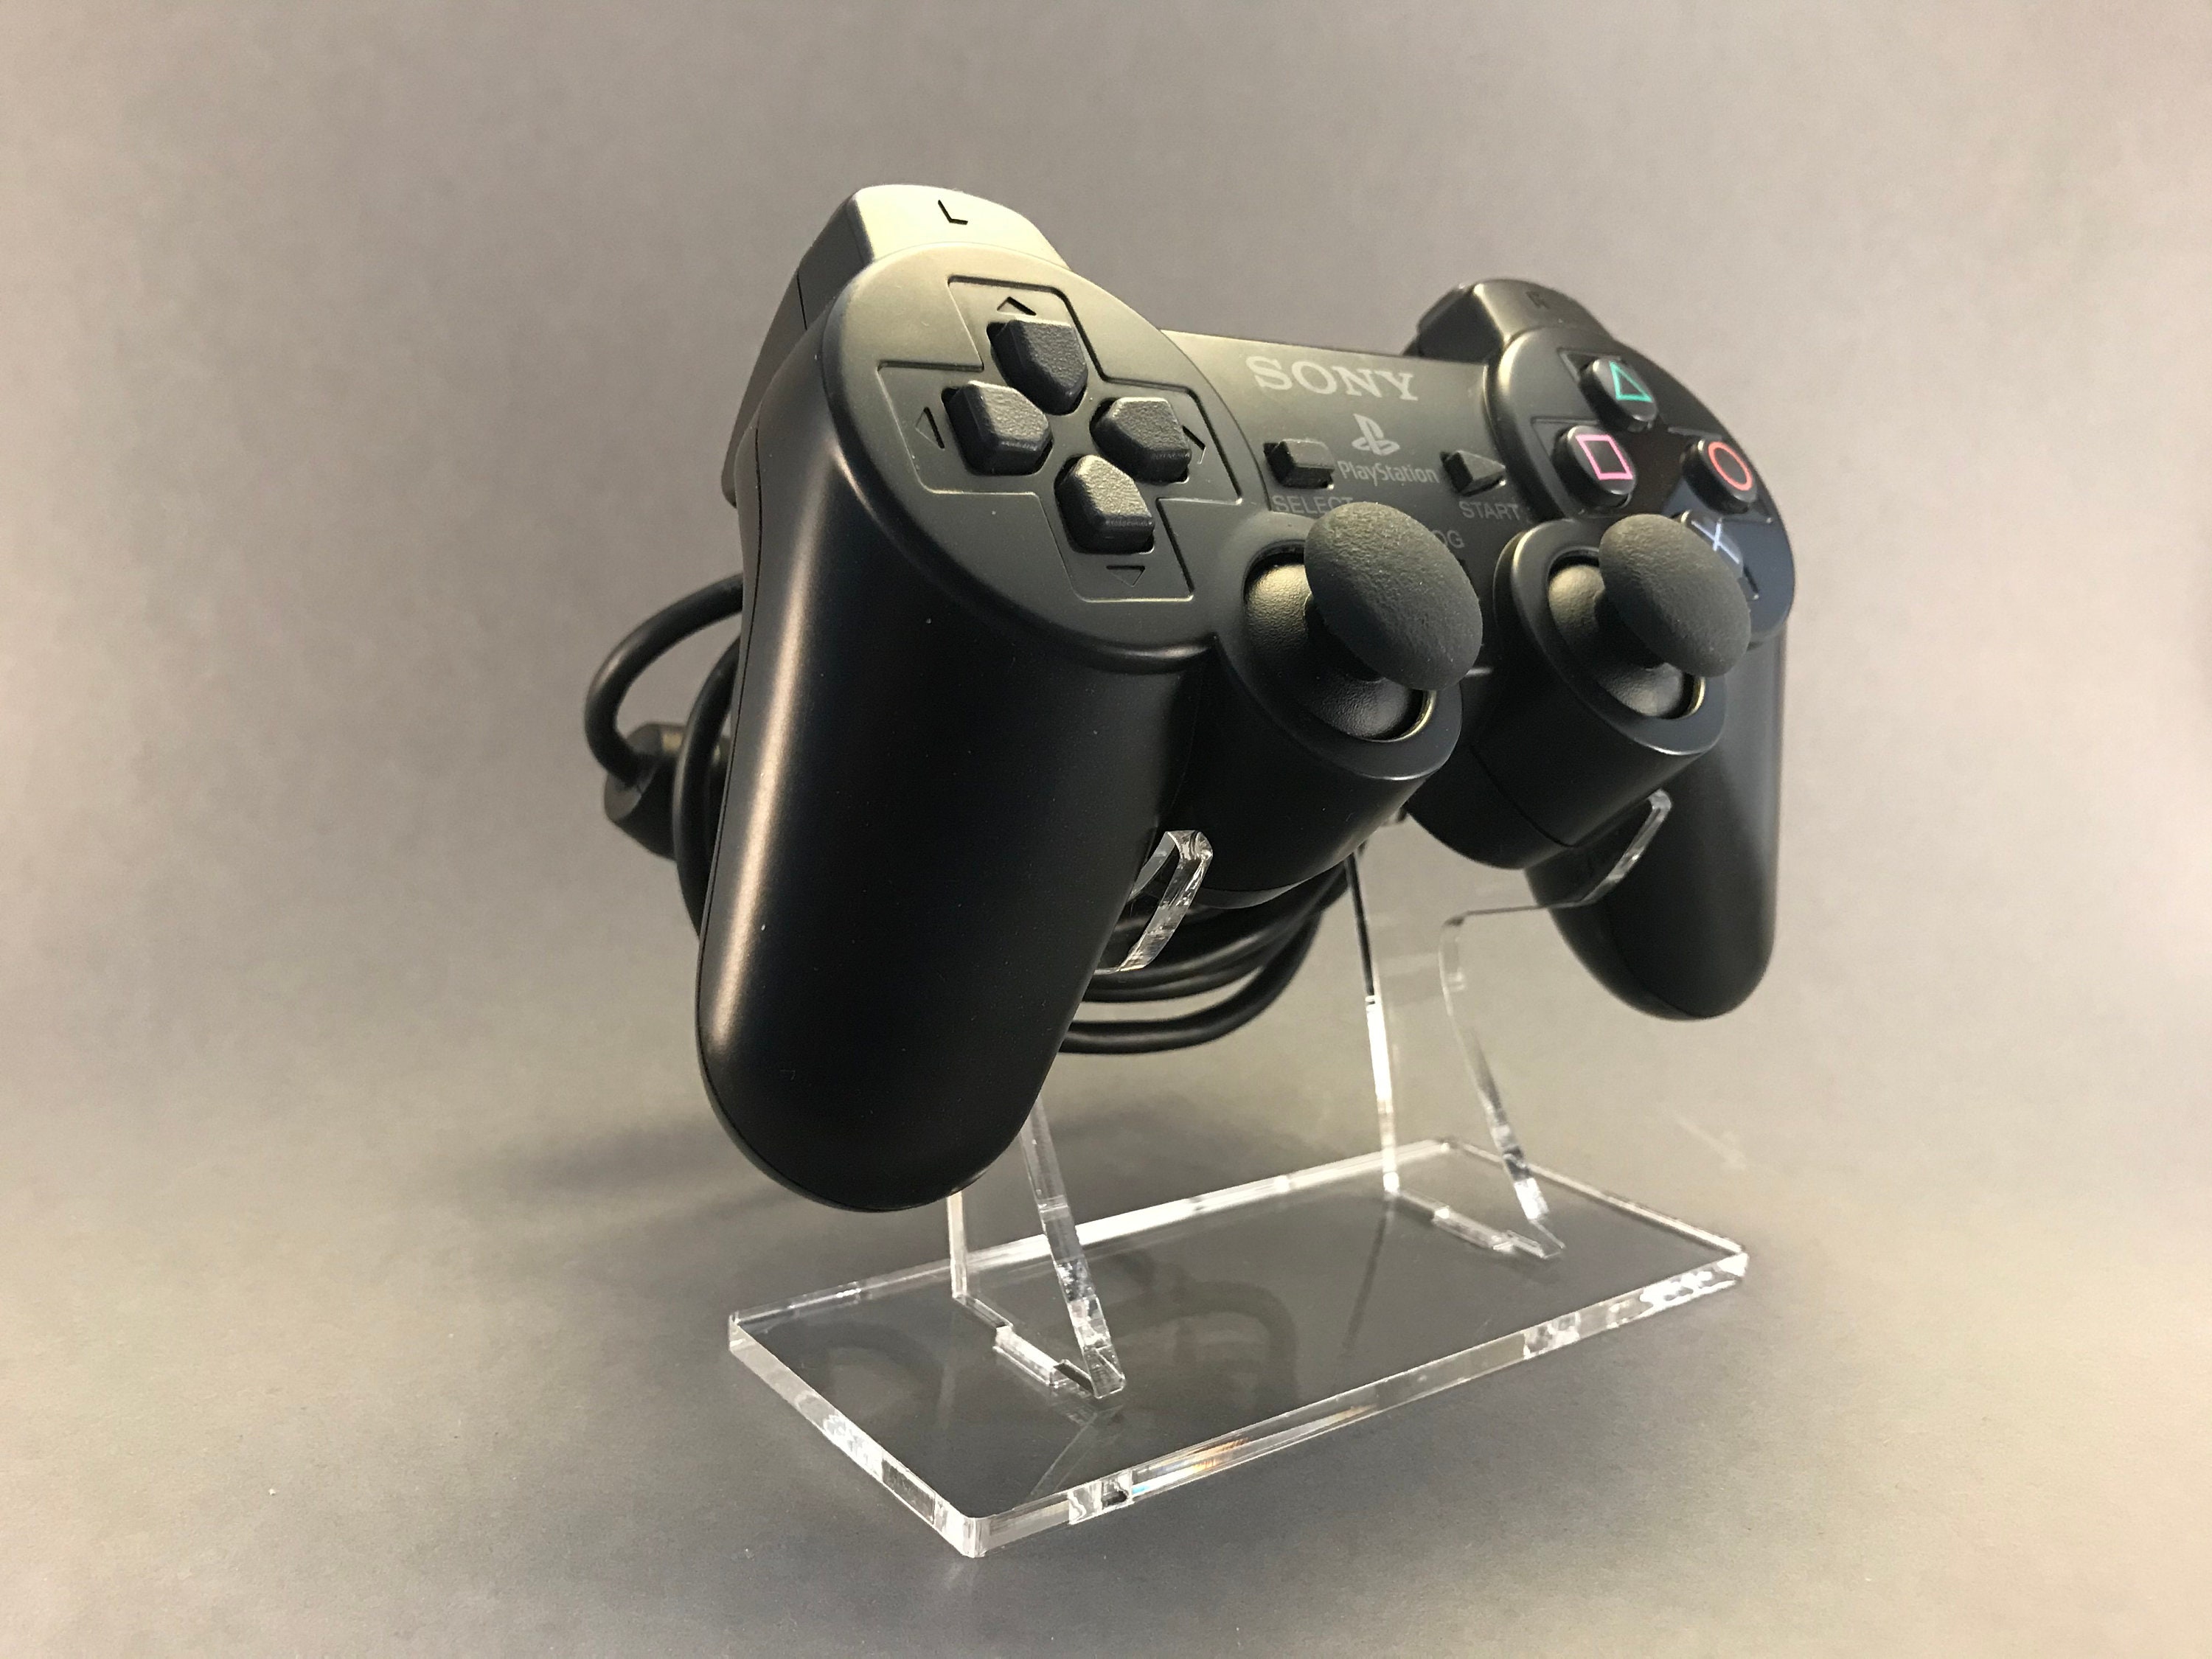 Acrylic Duo Display Stand for 8bitdo SN30 Pro Controller 